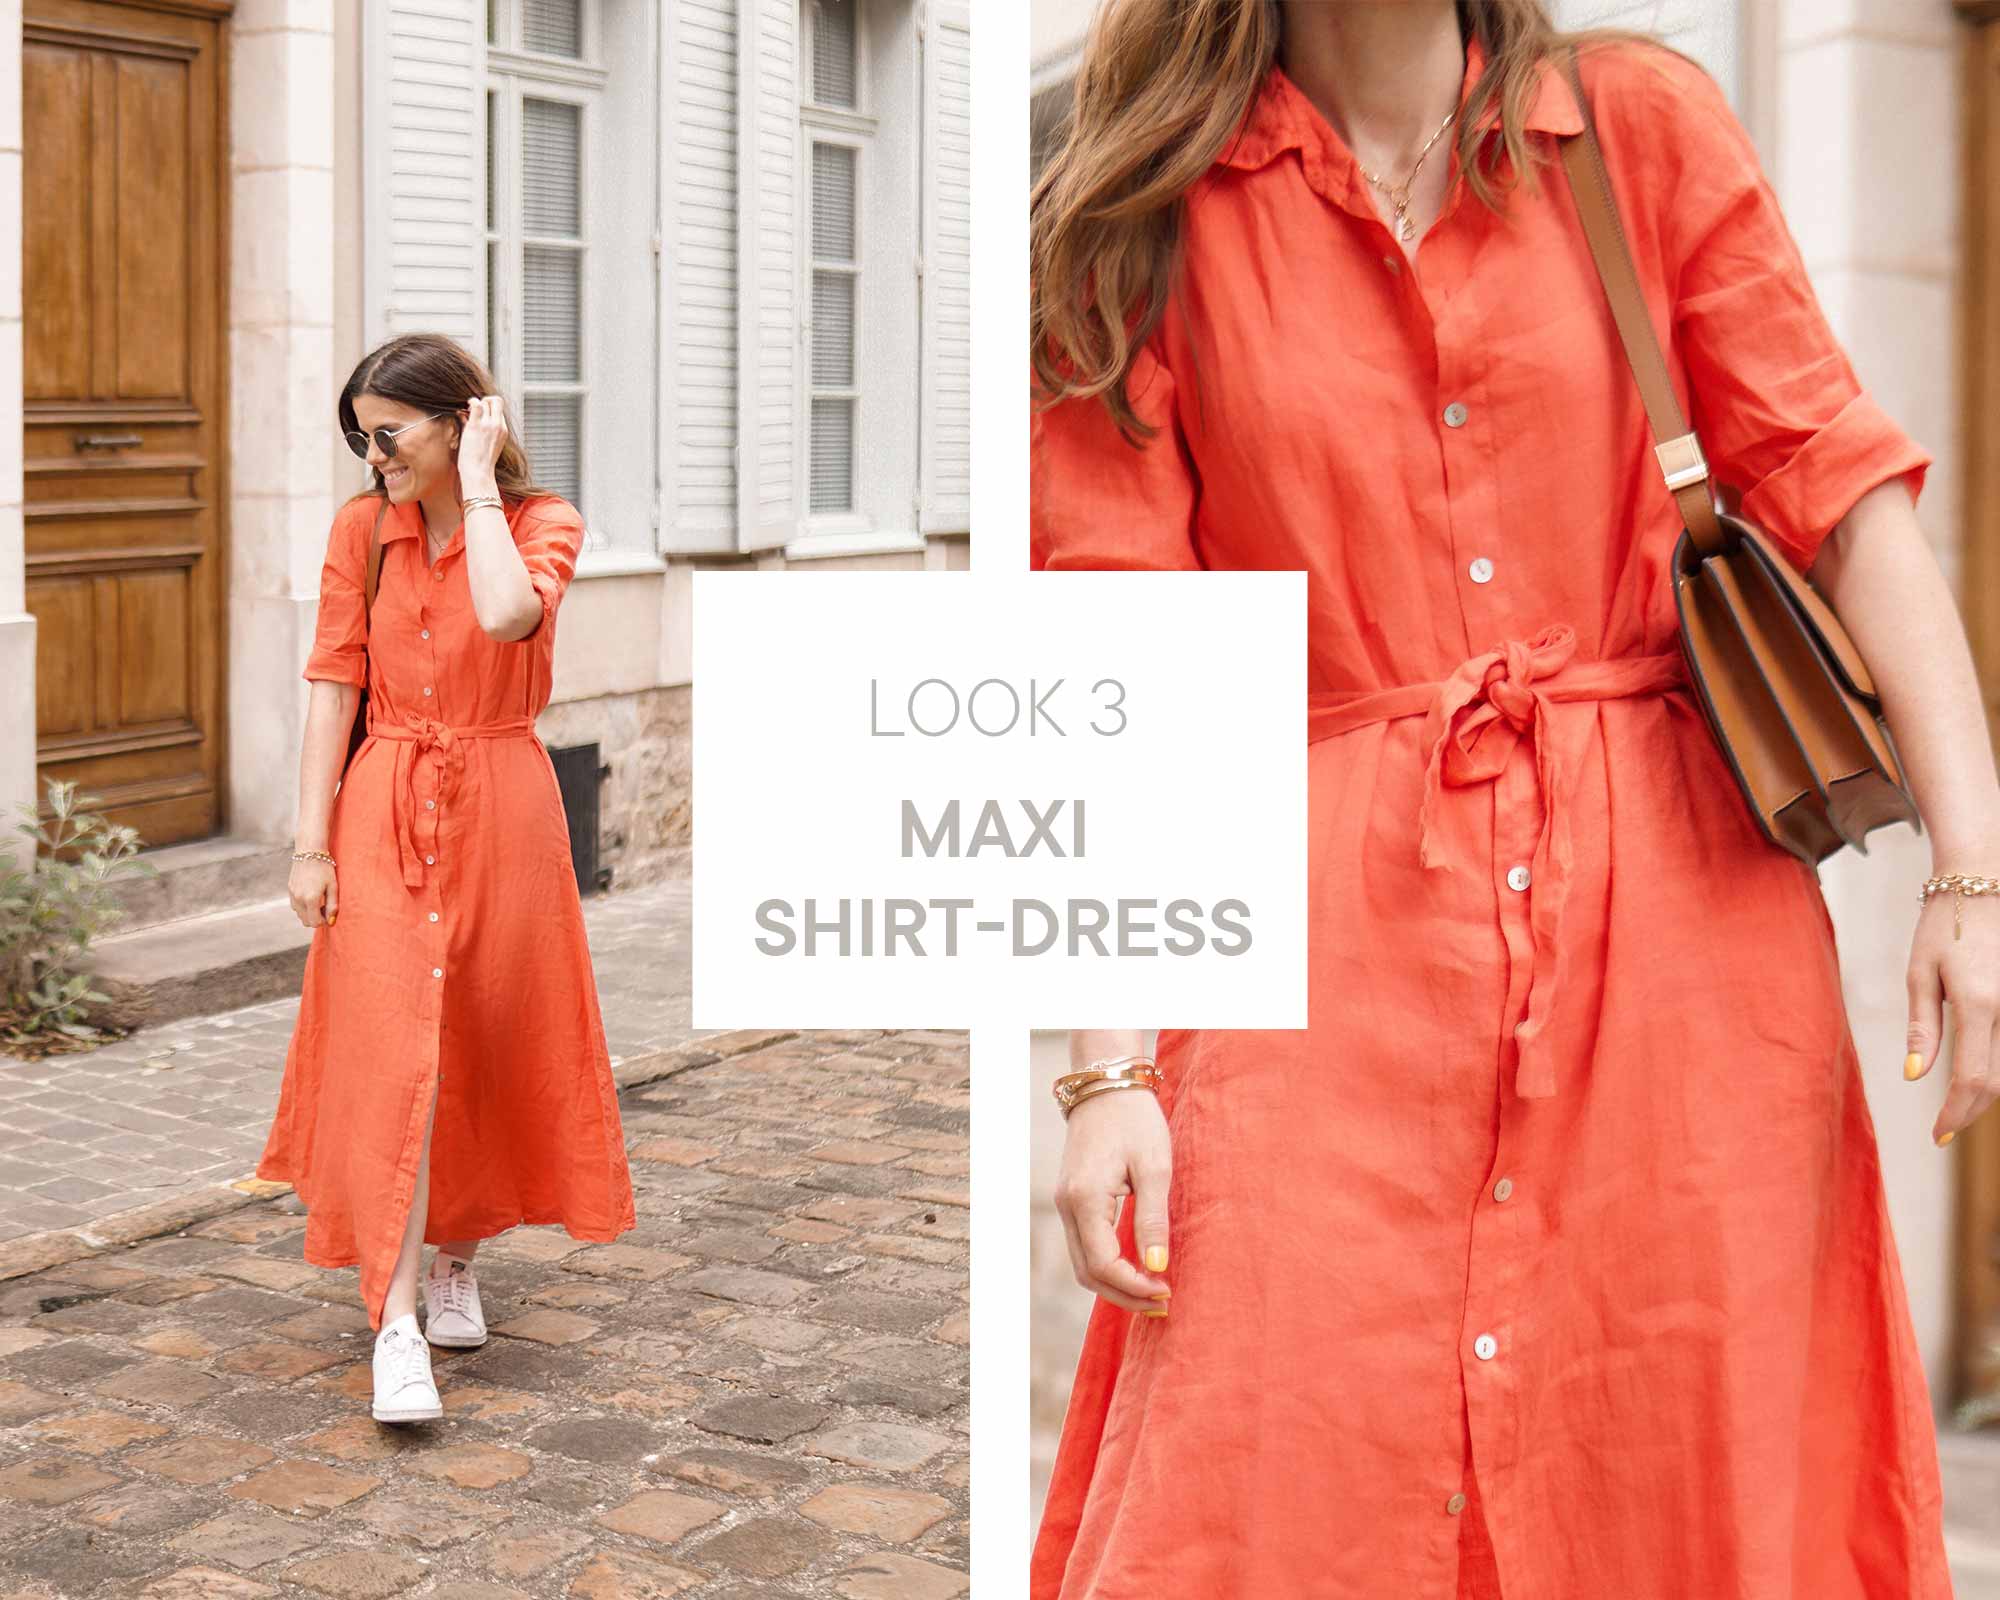 Alexia wearing a coral linen maxi dress with retro sunglasses in the streets of paris. 